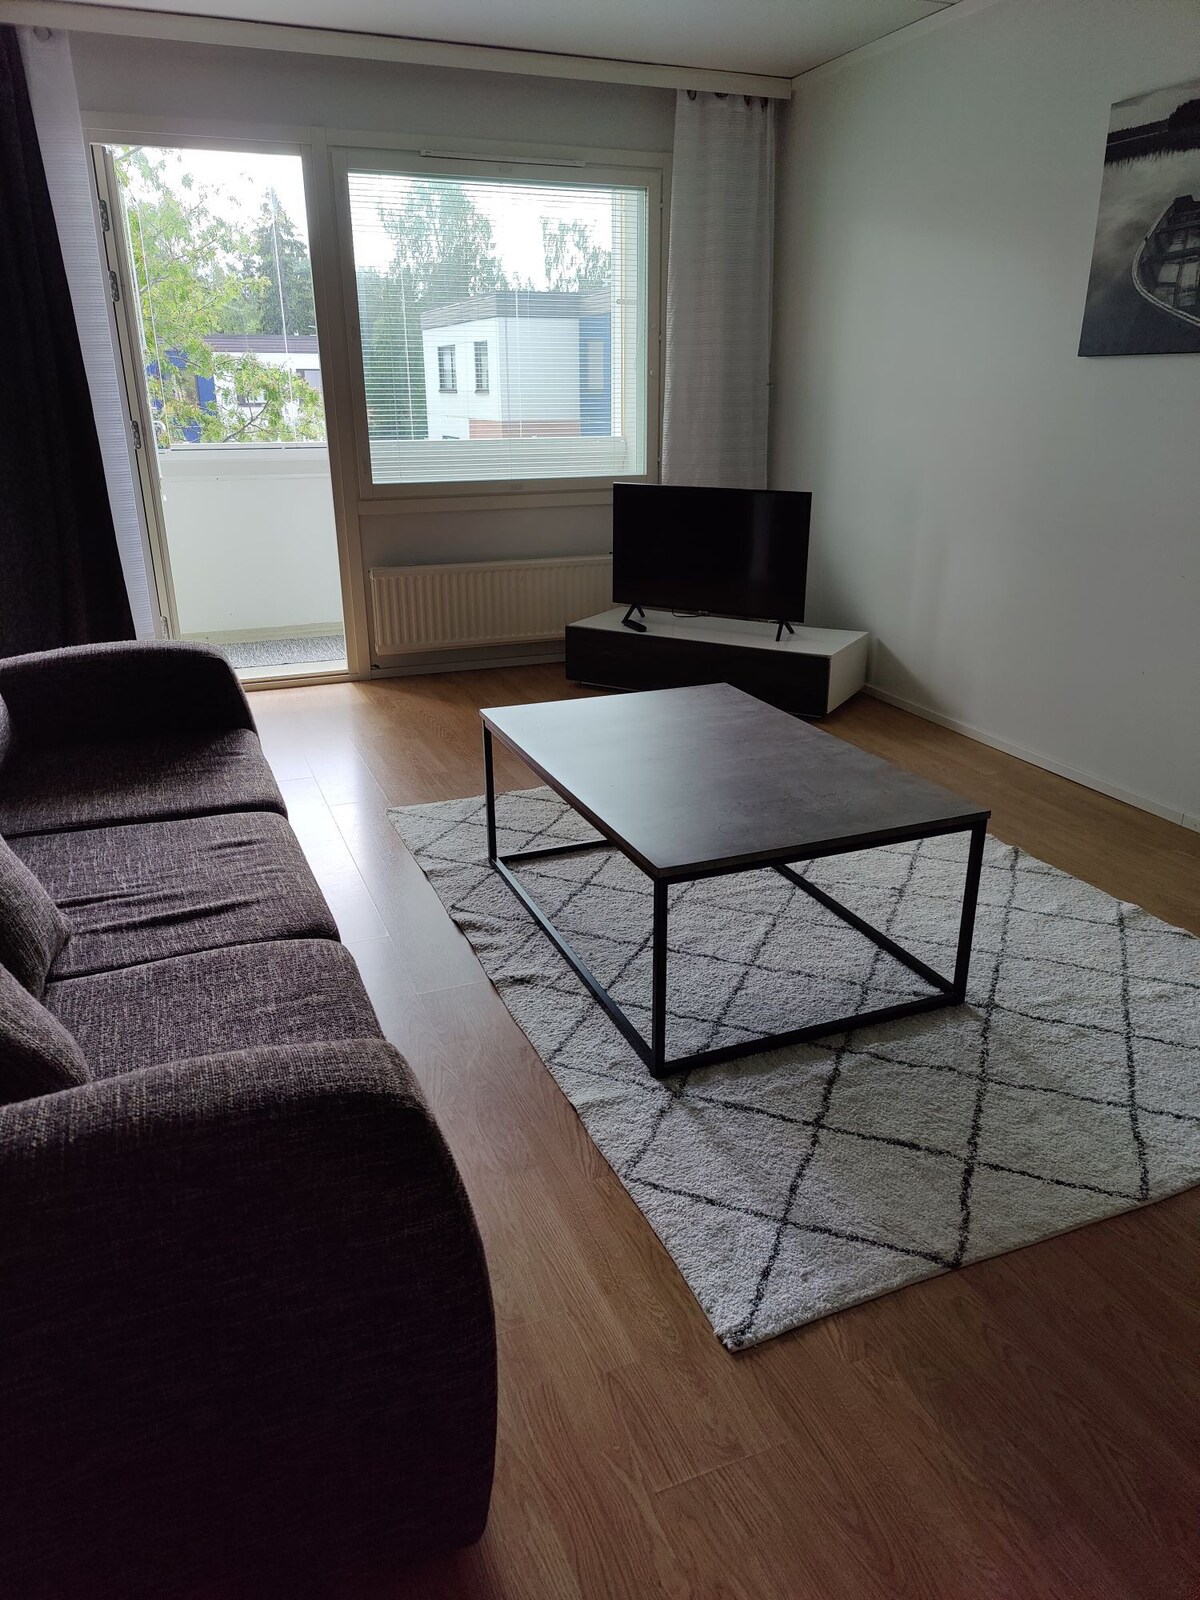 76m2 apartment near Helsinki and airport